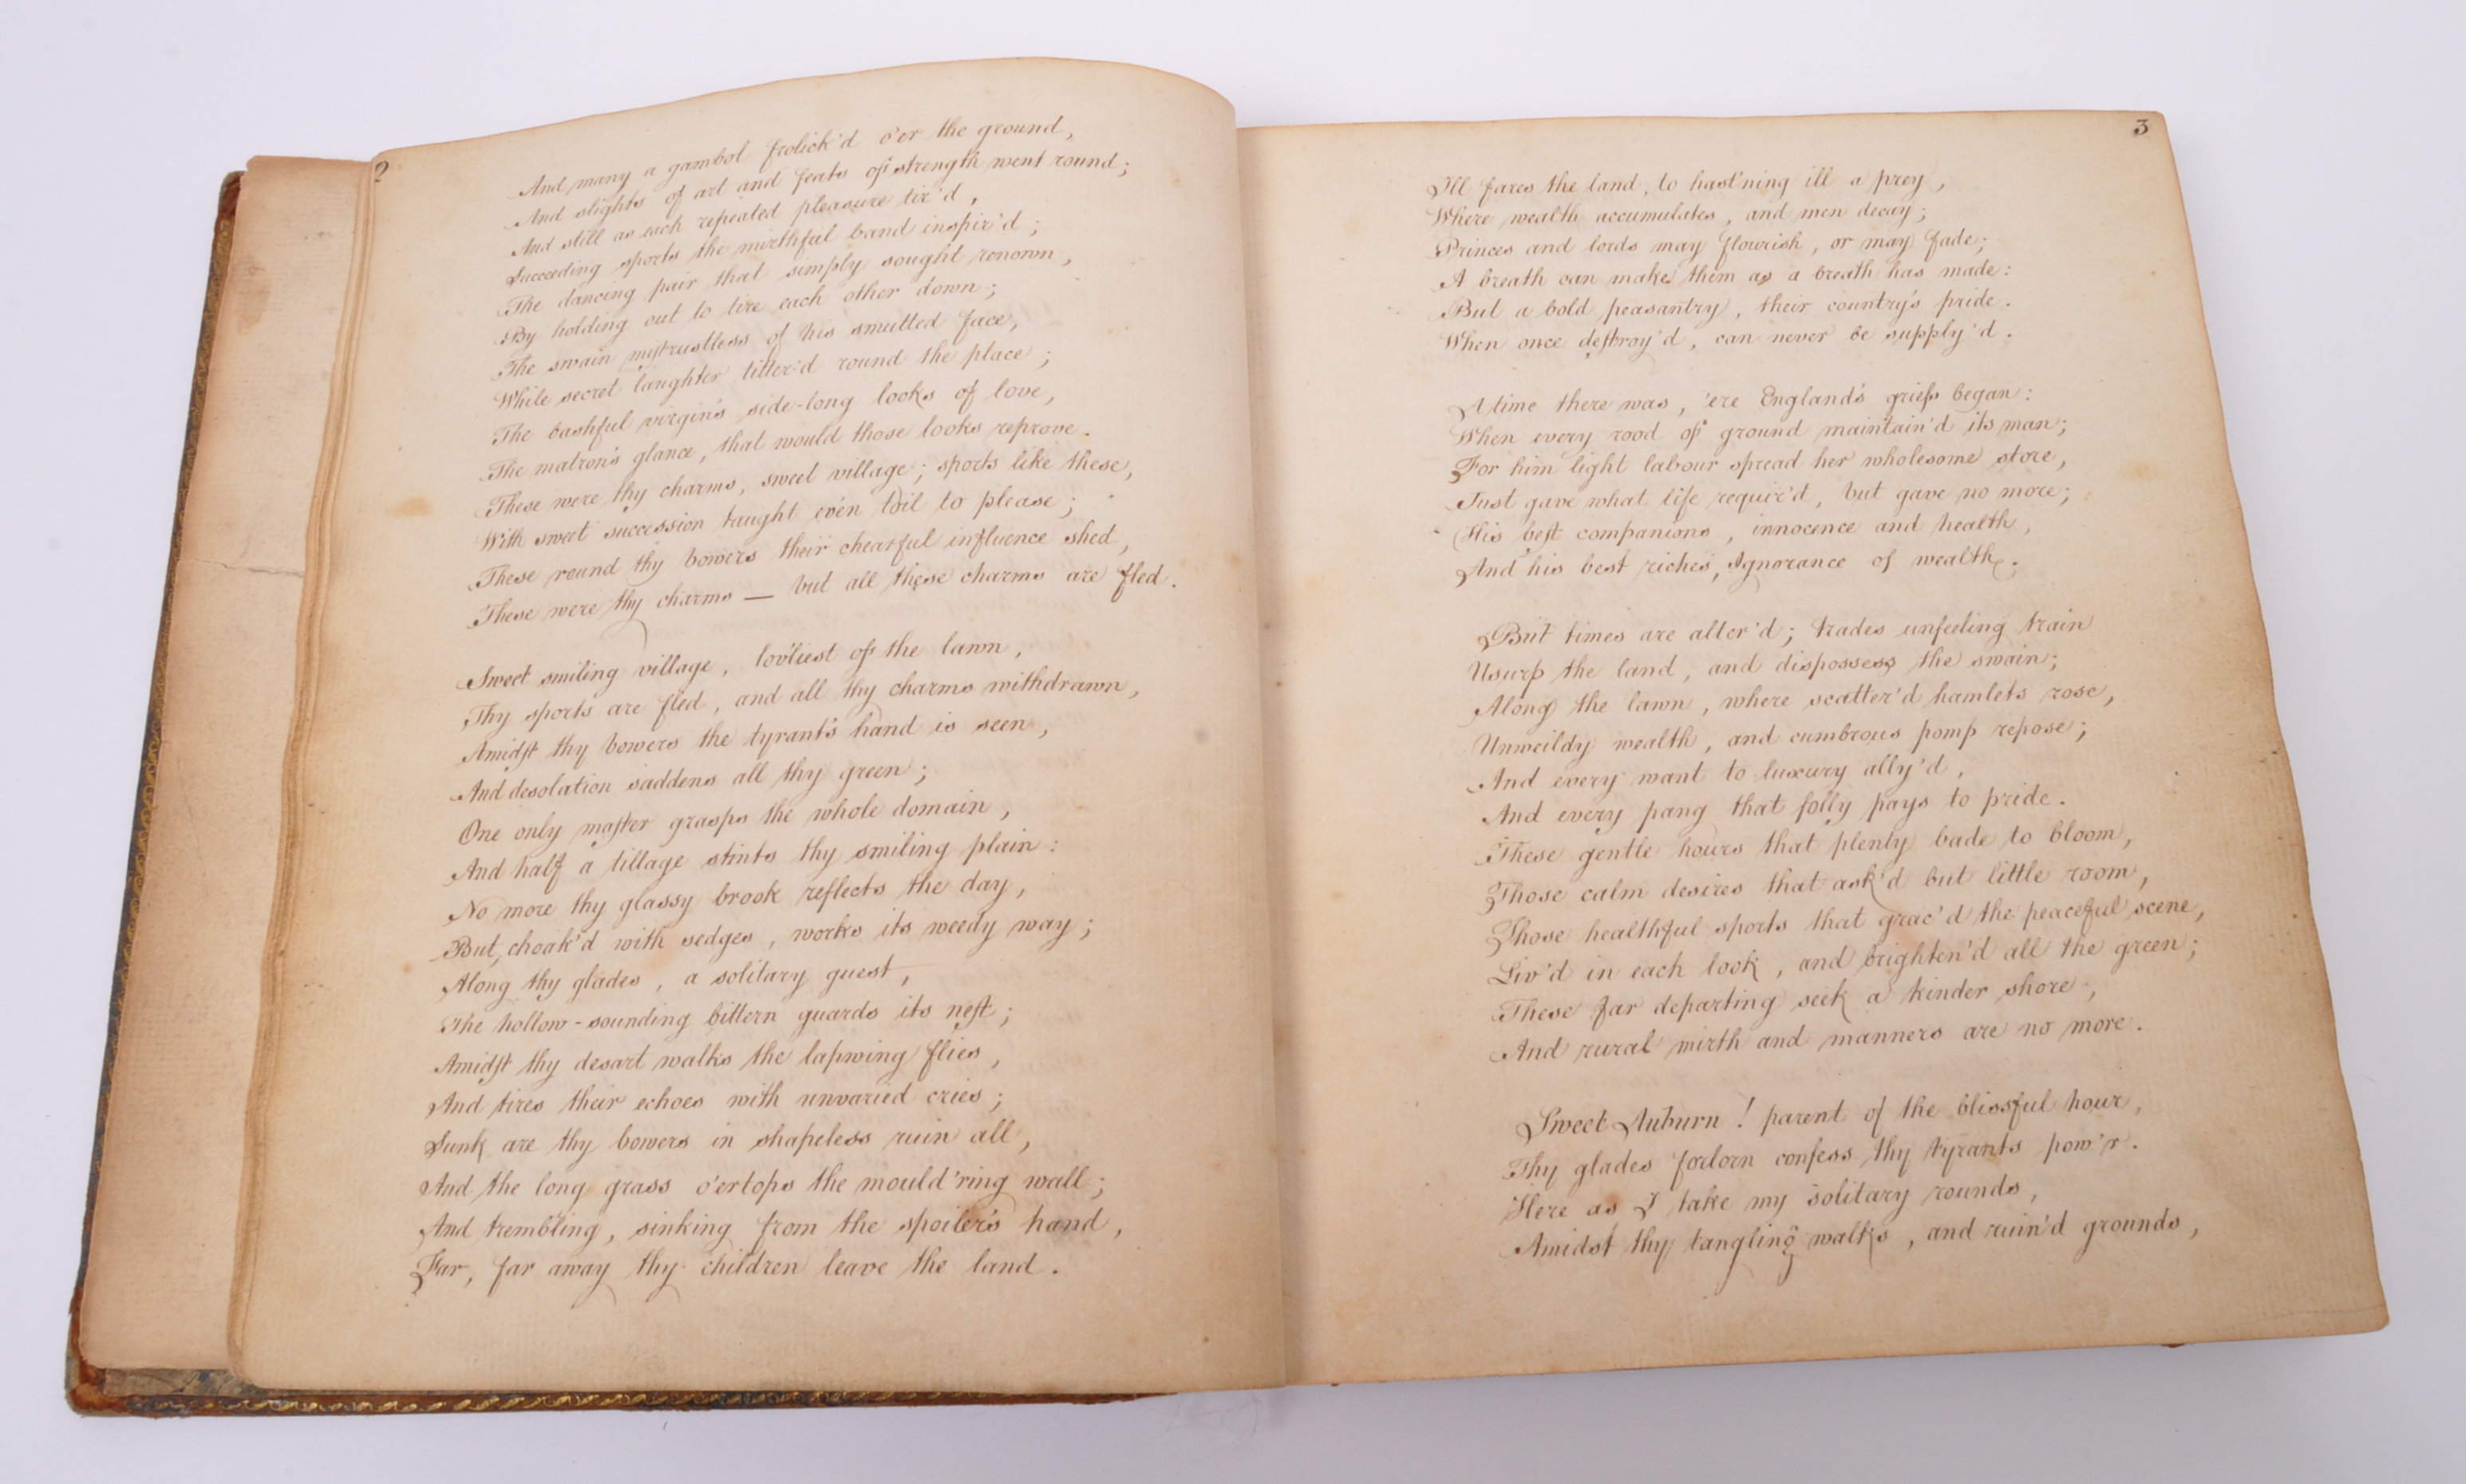 1794 - A COLLECTION OF POEMS - HANDWRITTEN MANUSCRIPT BOOK - Image 5 of 13